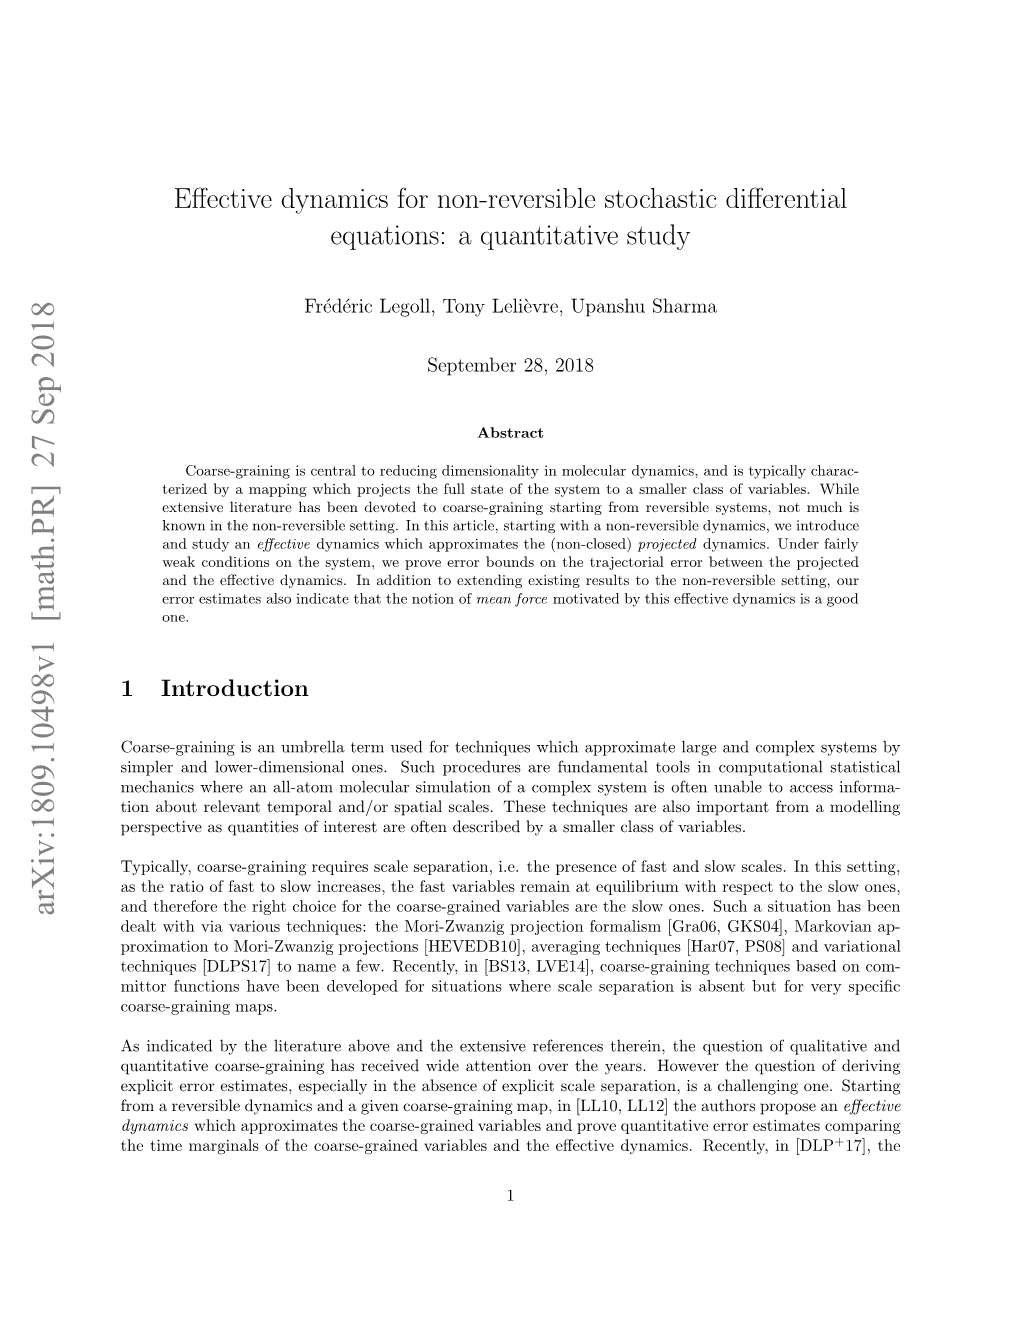 Effective Dynamics for Non-Reversible Stochastic Differential Equations: a Quantitative Study